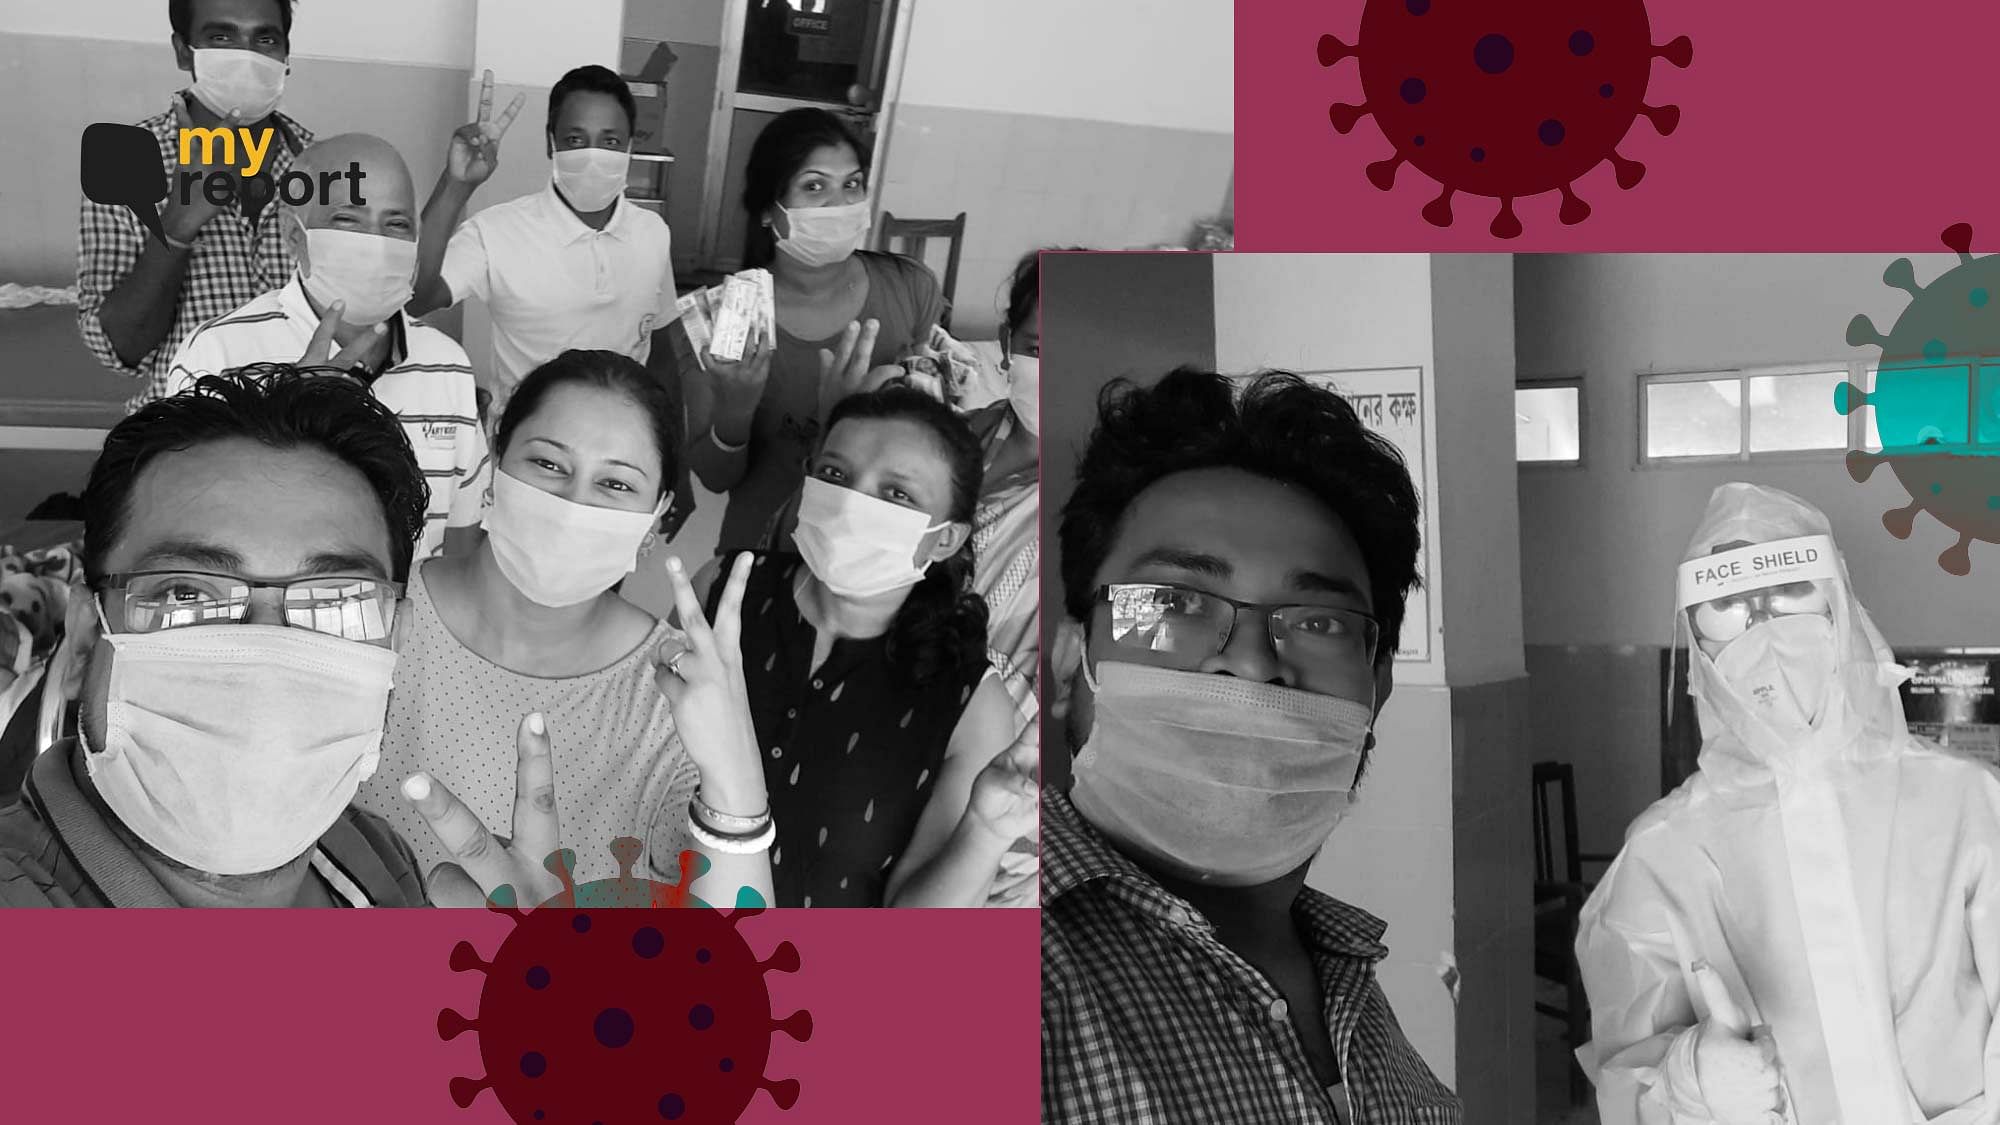 COVID patient Debashish Sharma reports on his experience at an isolation ward in Silchar, Assam.